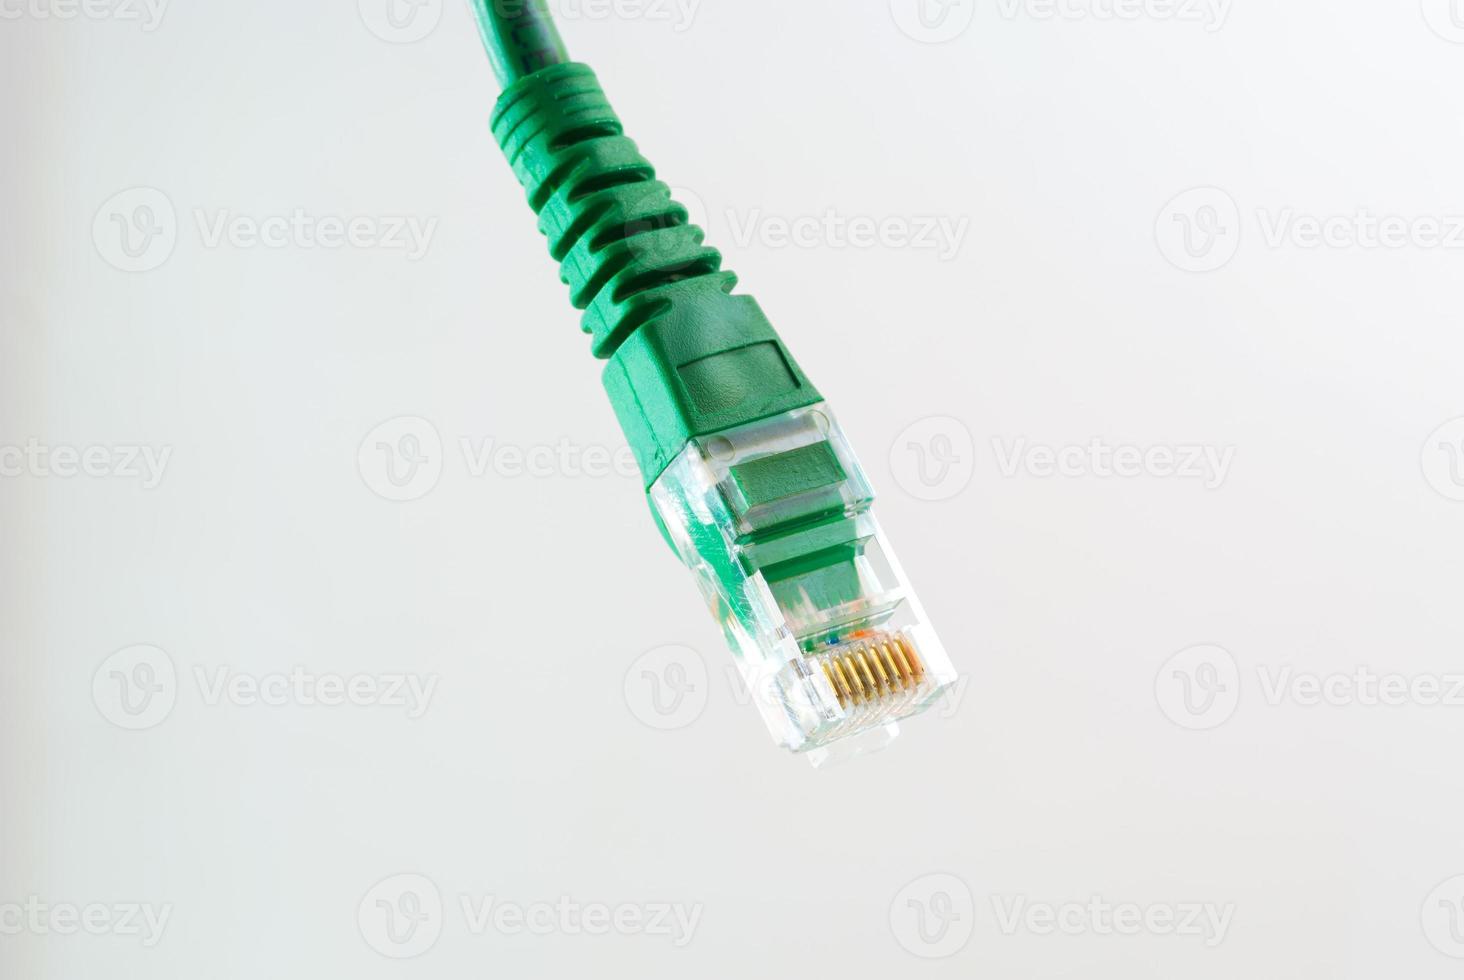 Network Cable RJ45 Head on white background photo